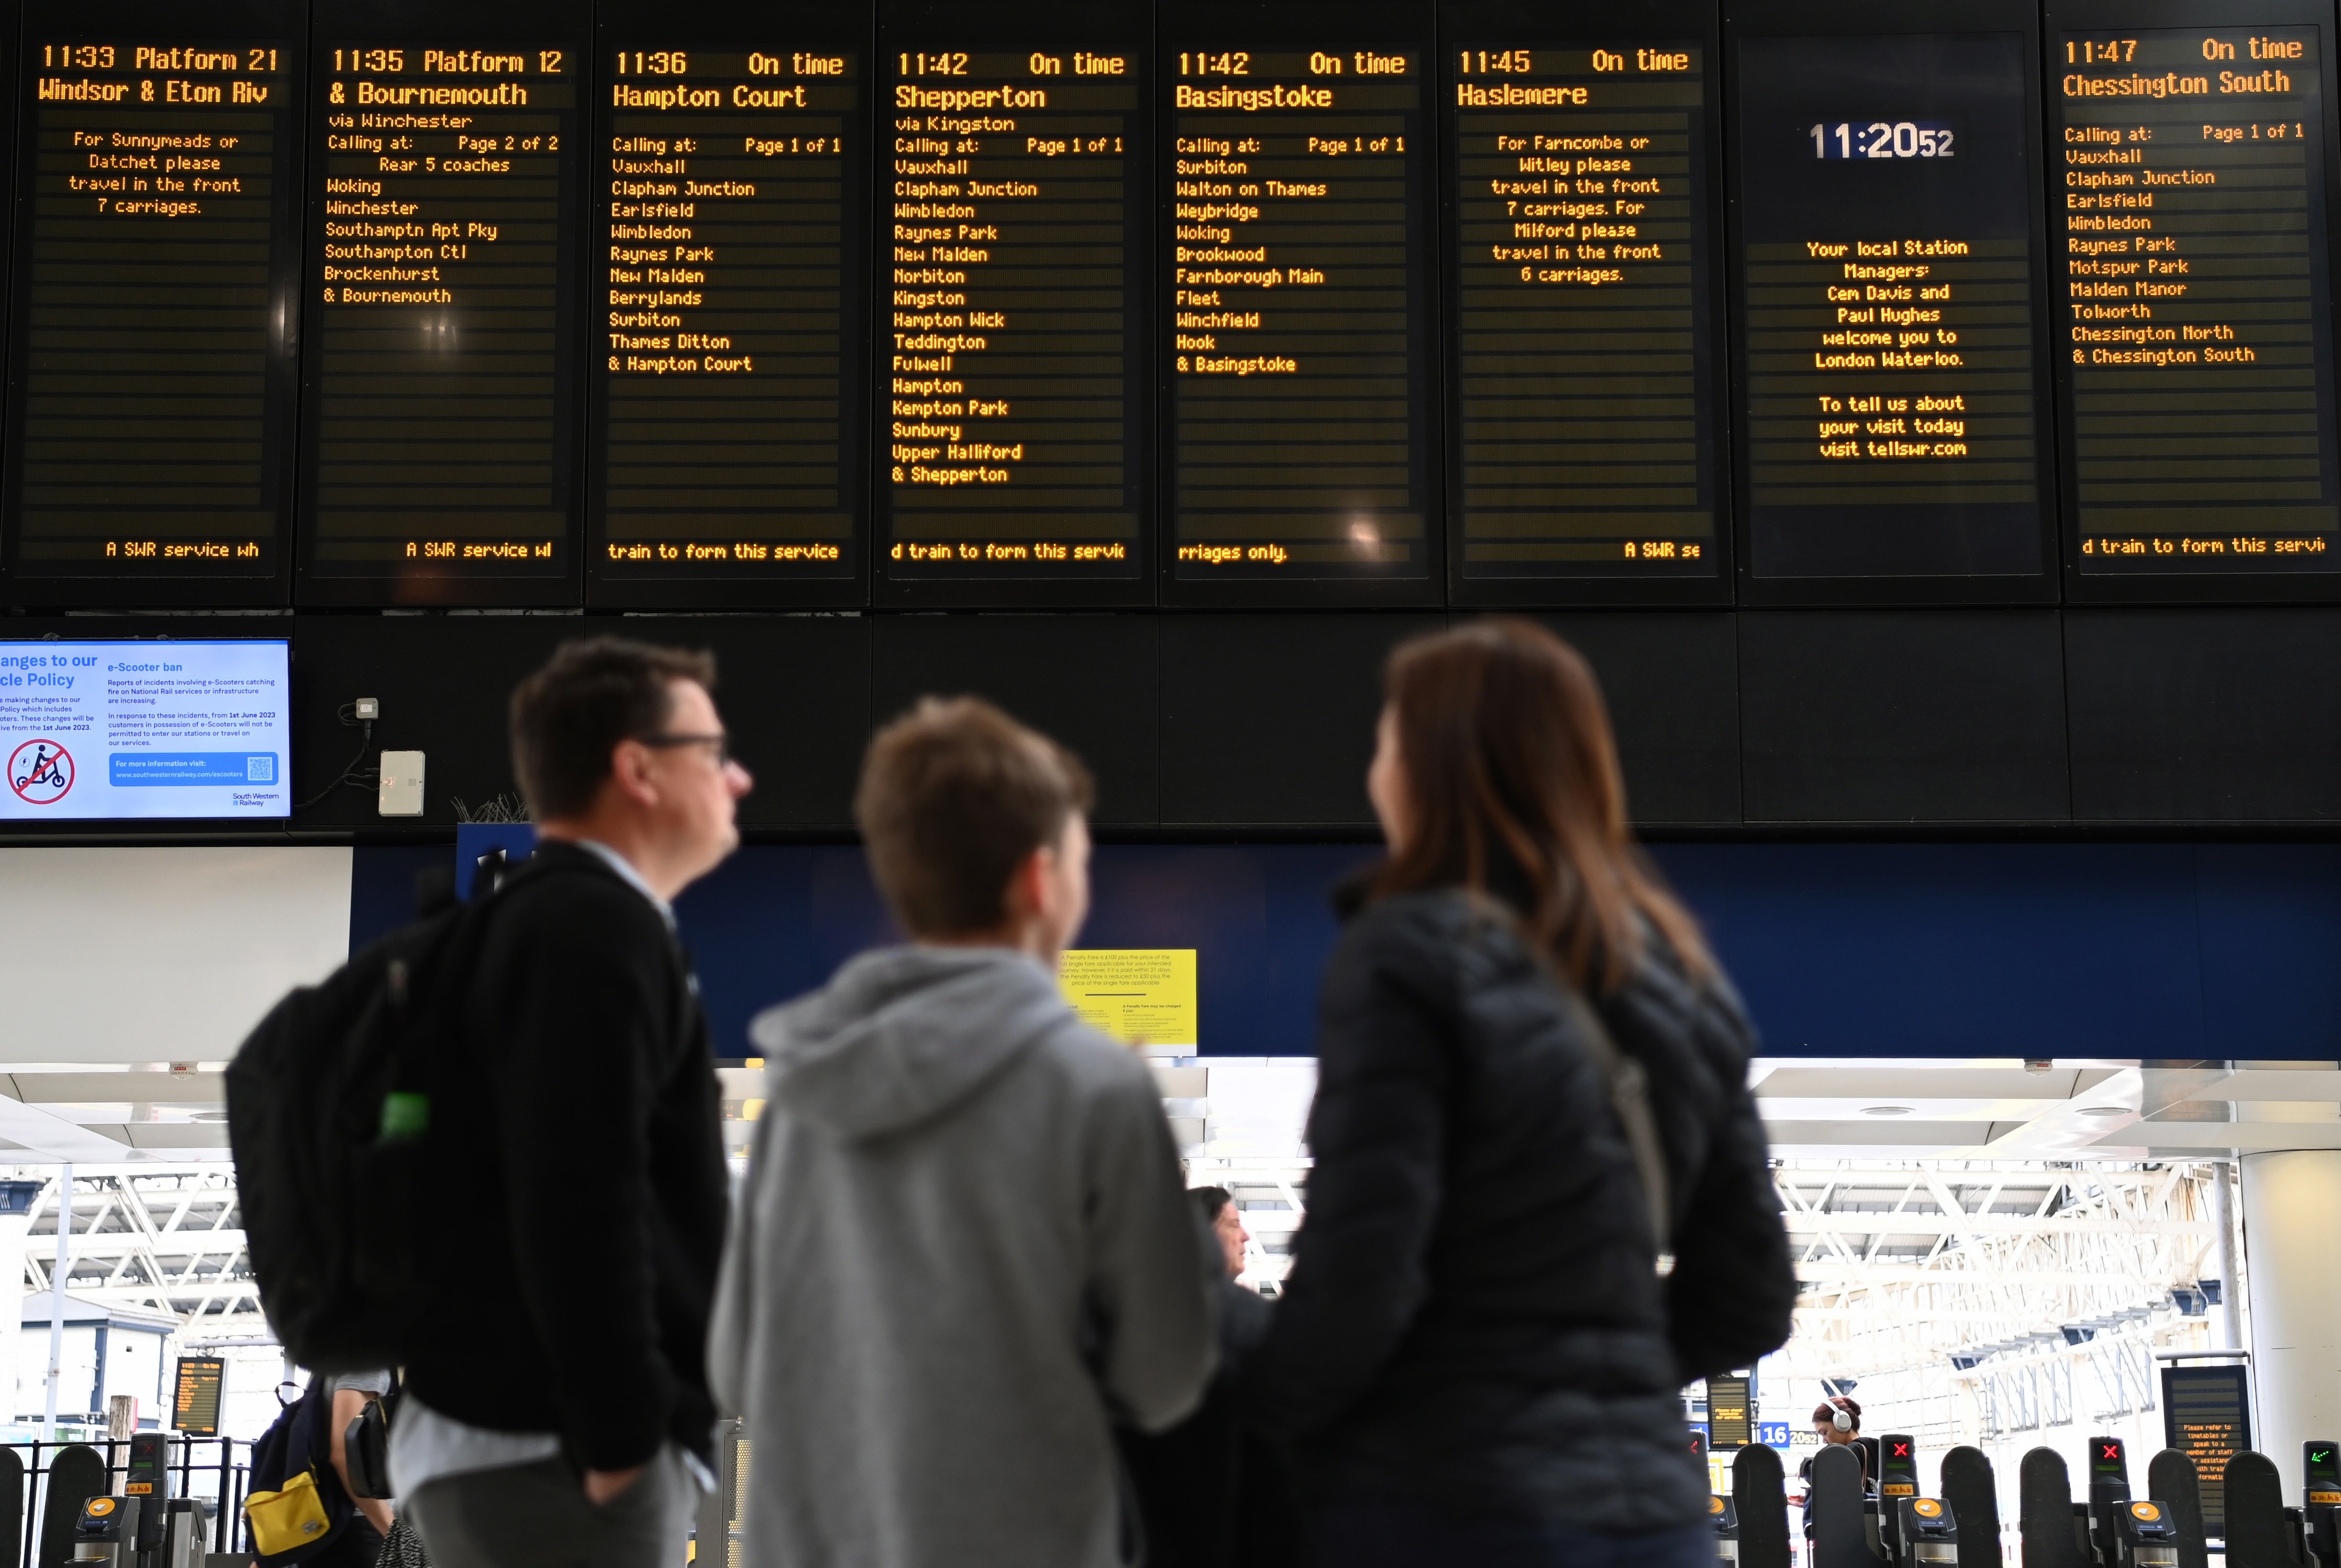 High train fares are an area that may influence ‘soft Tories’ to vote for the Liberal Democrats